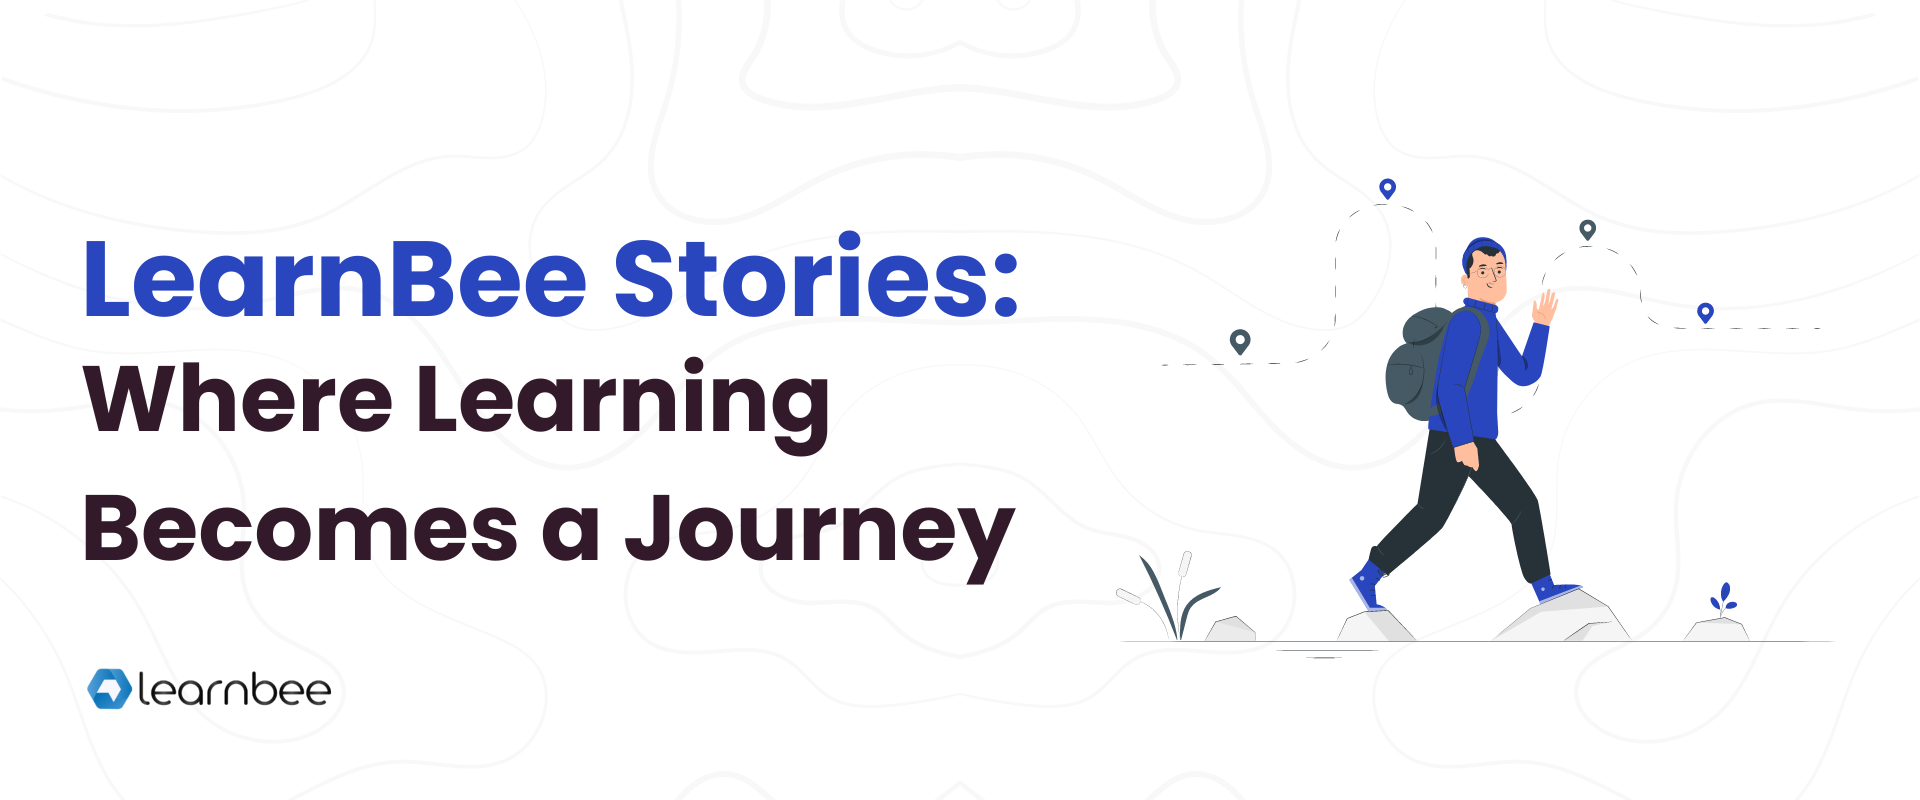 Learnbee Stories: Where learning becomes a journey